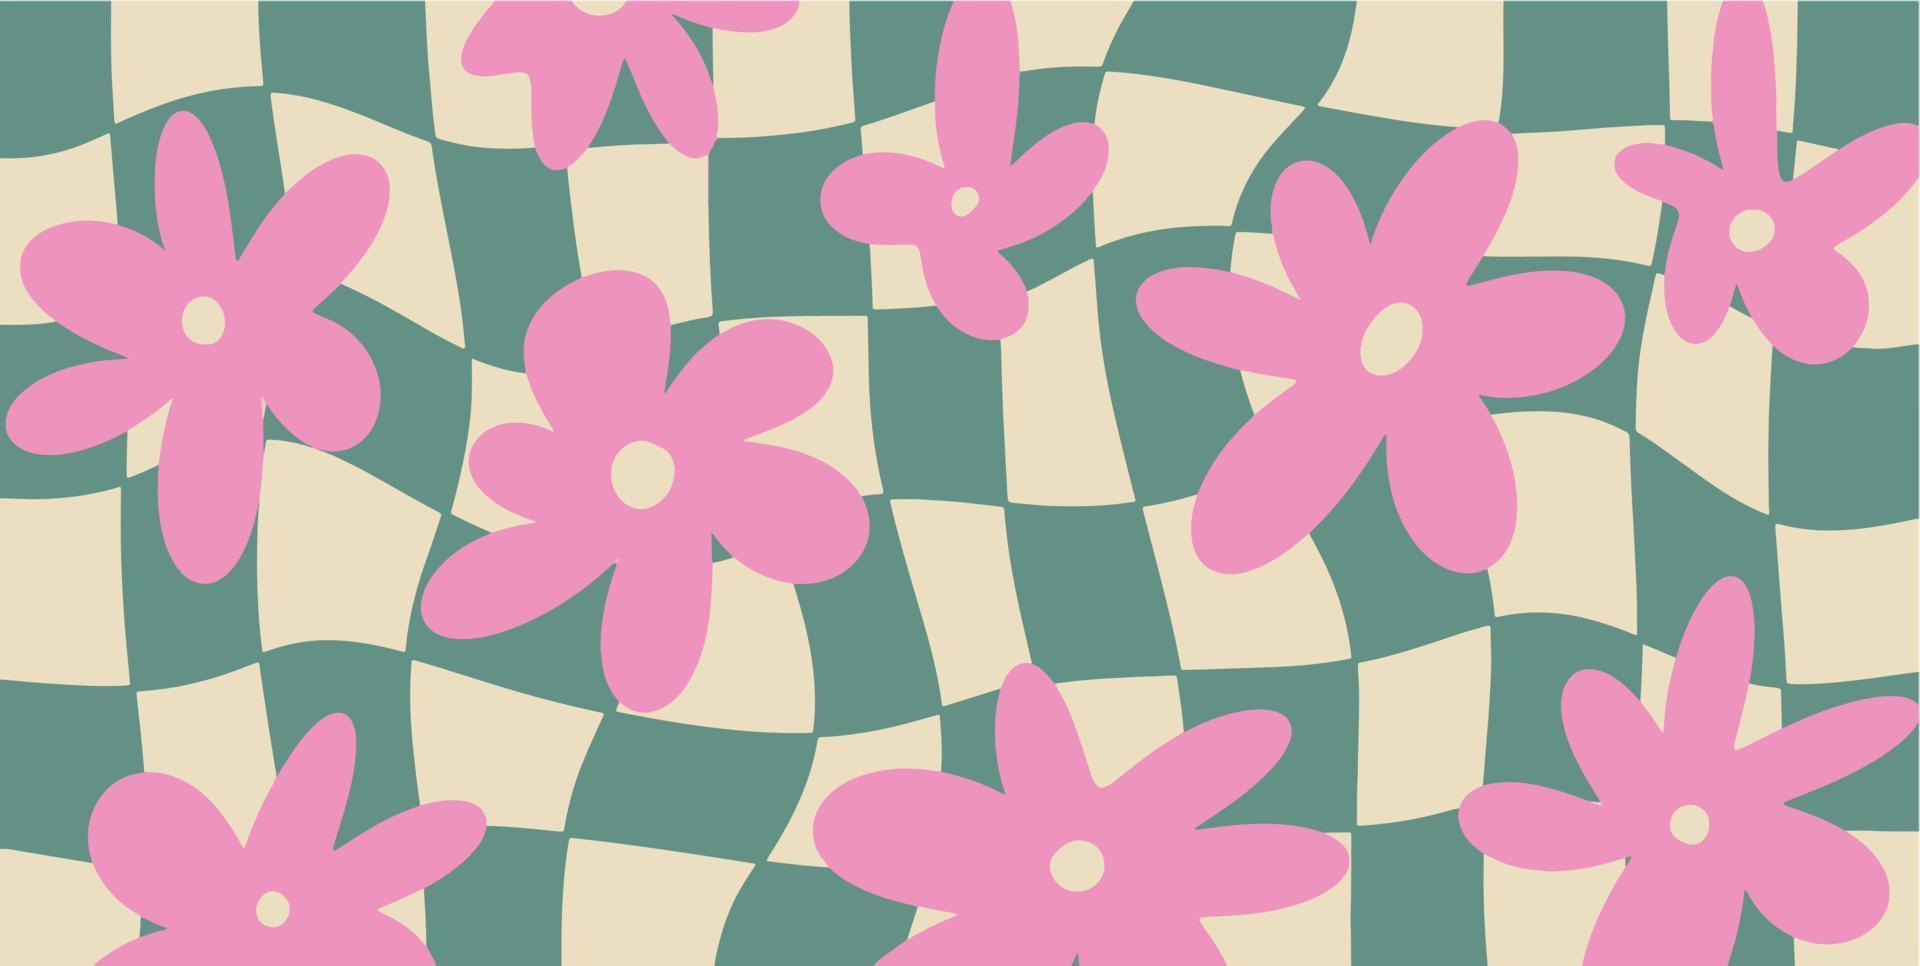 A pattern of pink flowers on green and beige - Flower, 70s, grid, 60s, daisy, trippy